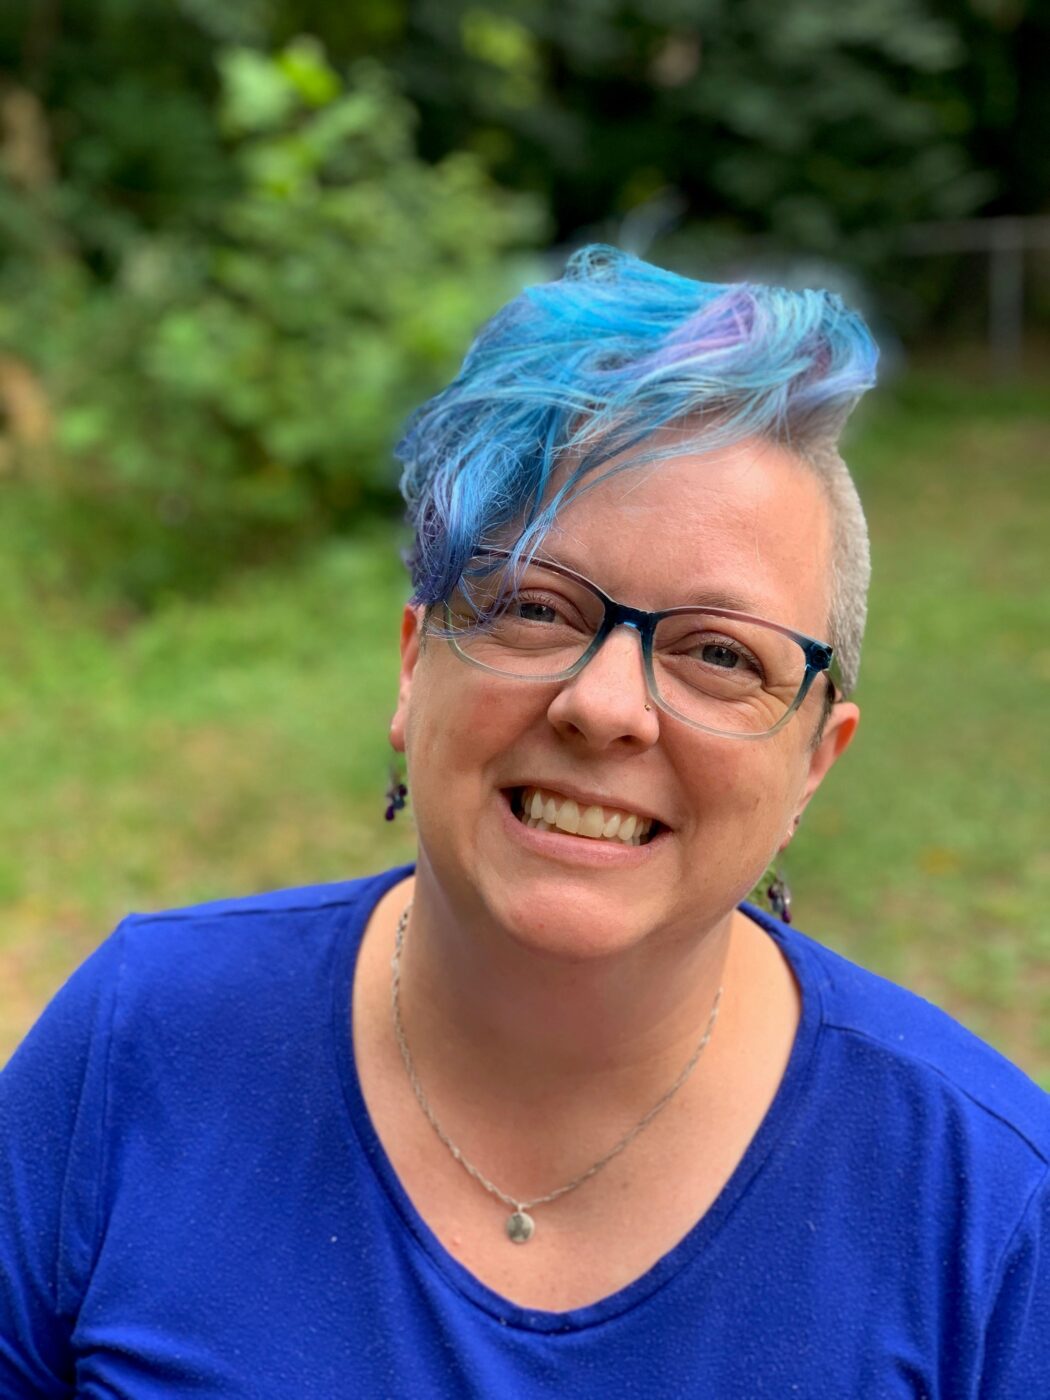 Chris Ash, a light-skinned white queer person smiles in their backyard. They have a blue shirt, short blue and purple hair, and blue glasses.